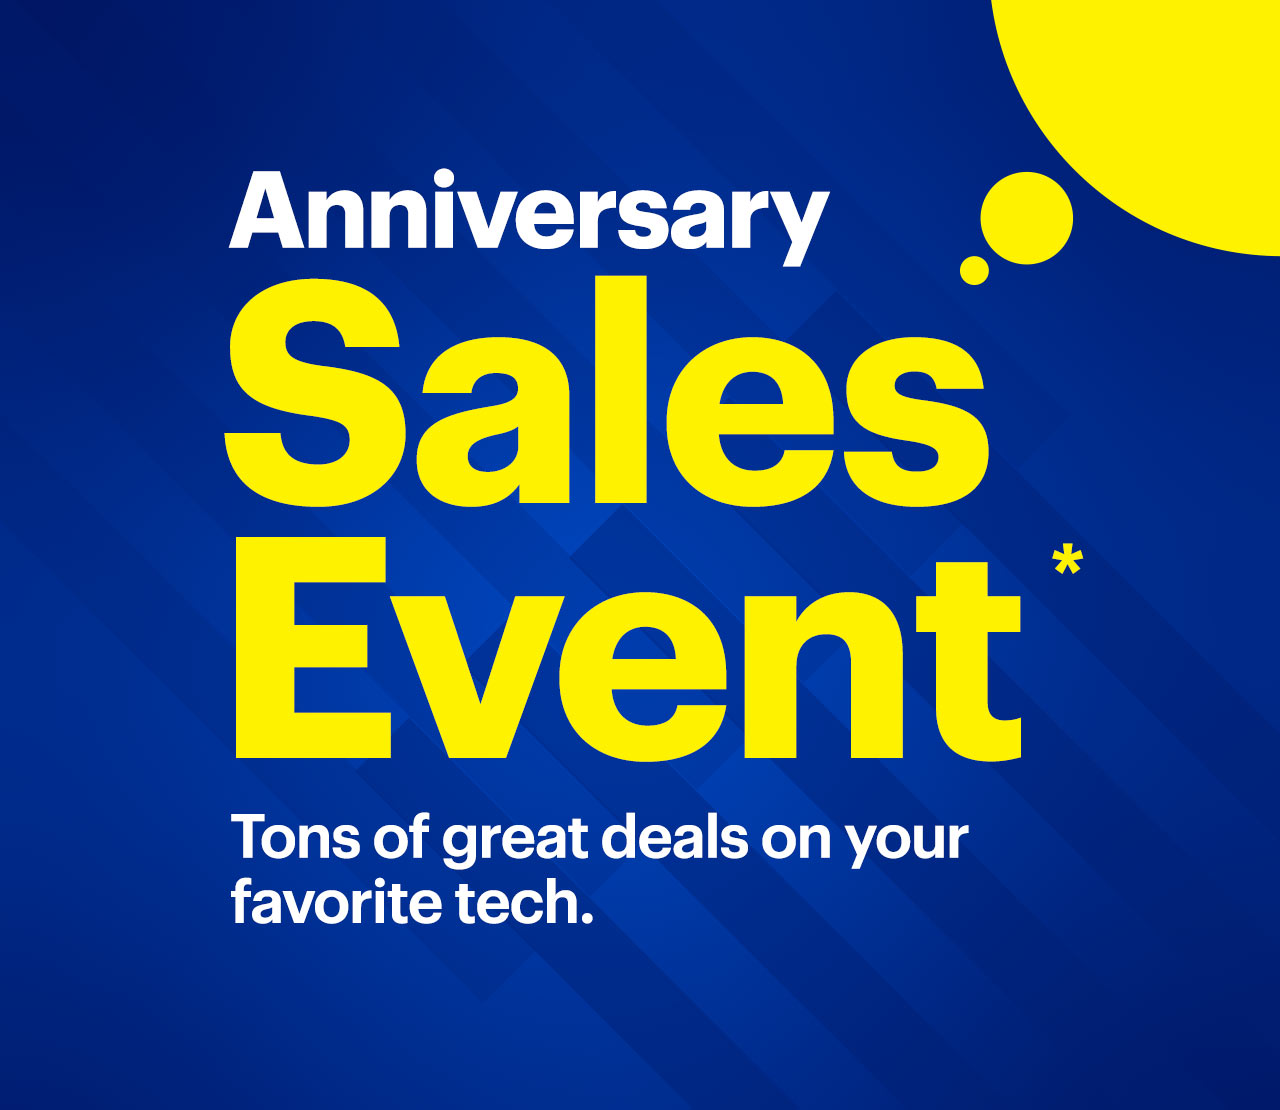 Anniversary Sales Event. Tons of great deals on your favorite tech. Reference disclaimer.